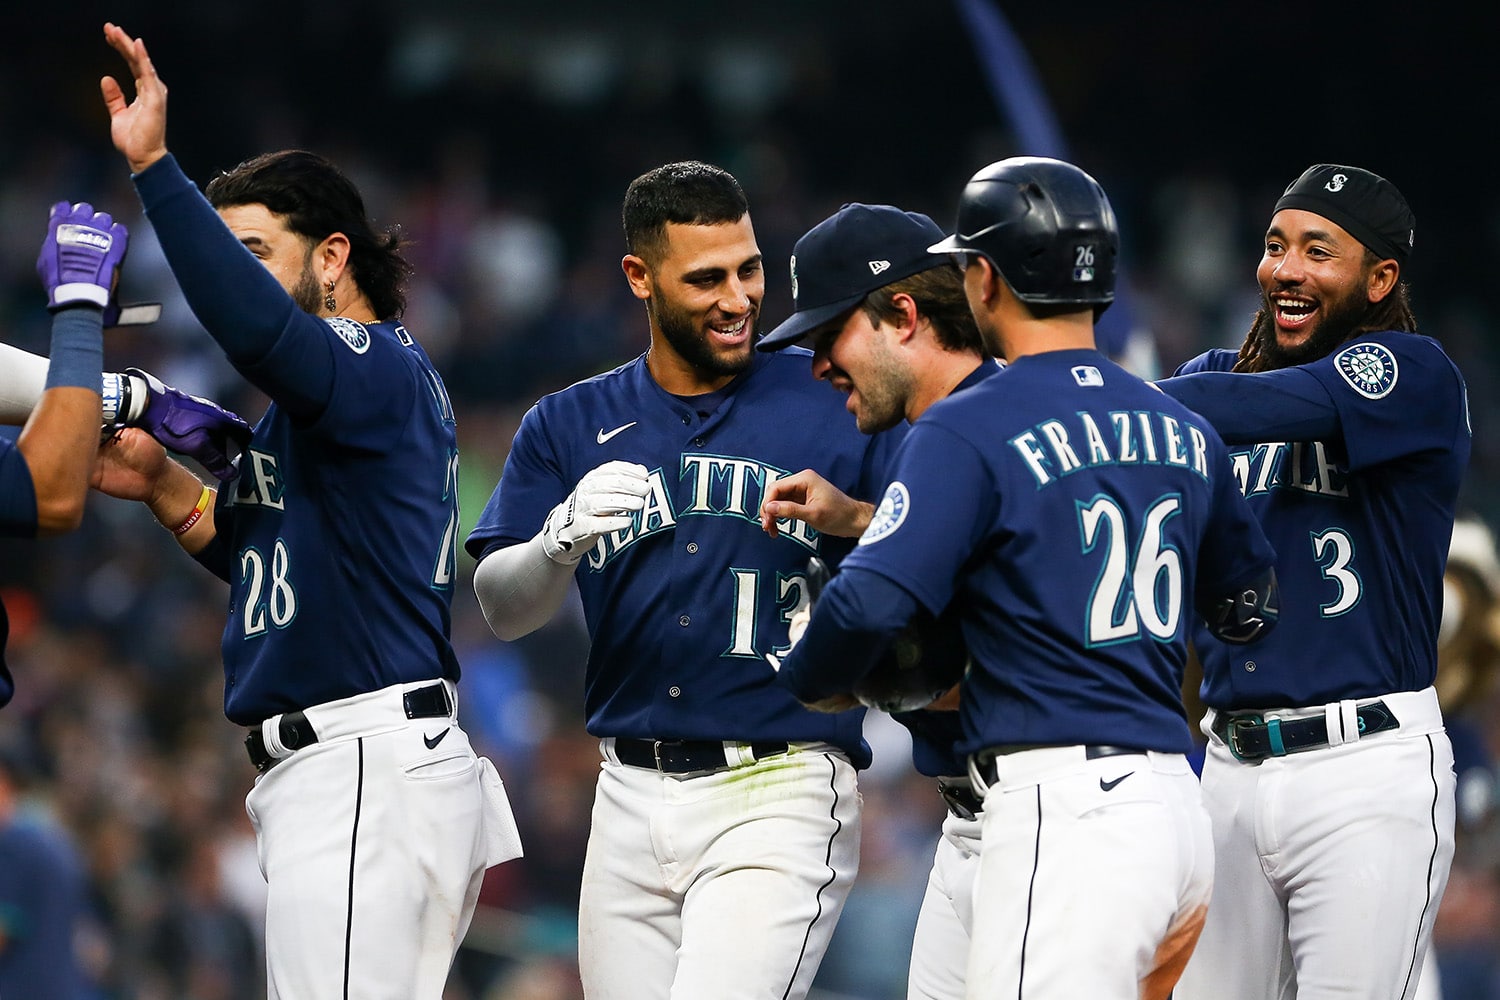 Mariners players criticize team for selling Blue Jays gear in stadium store